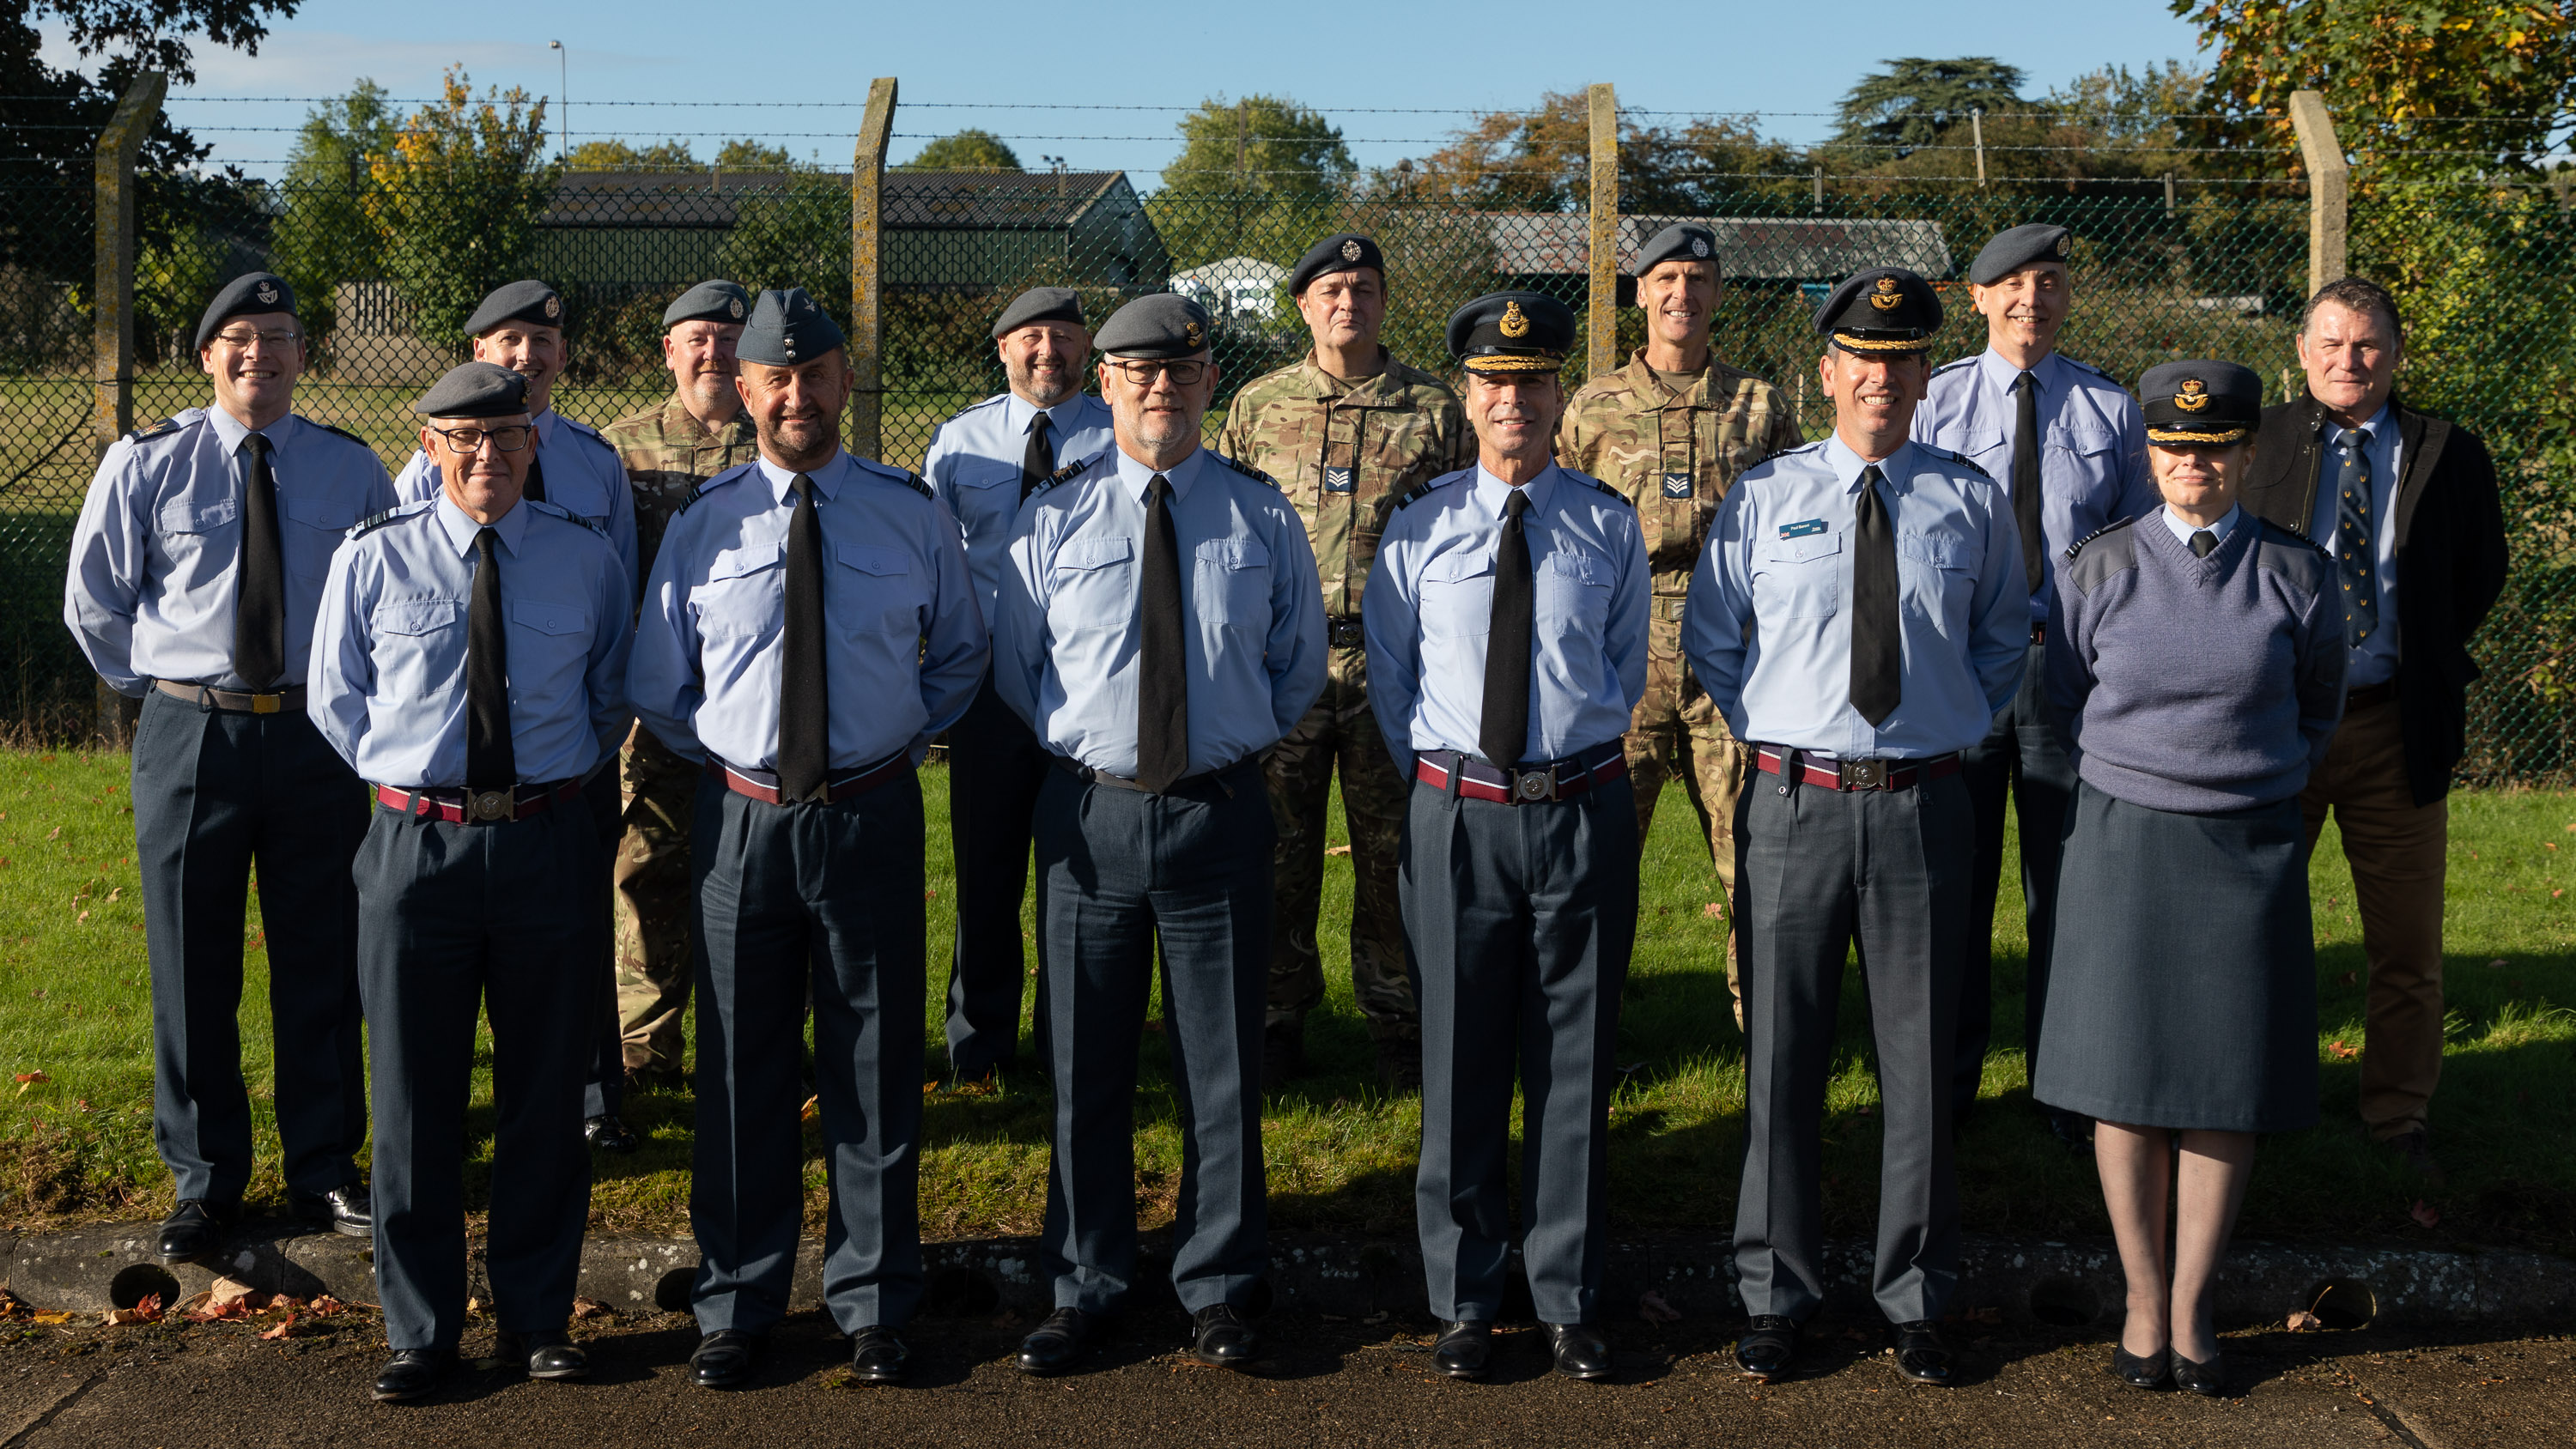 Image shows RAF aviators standing for photo.